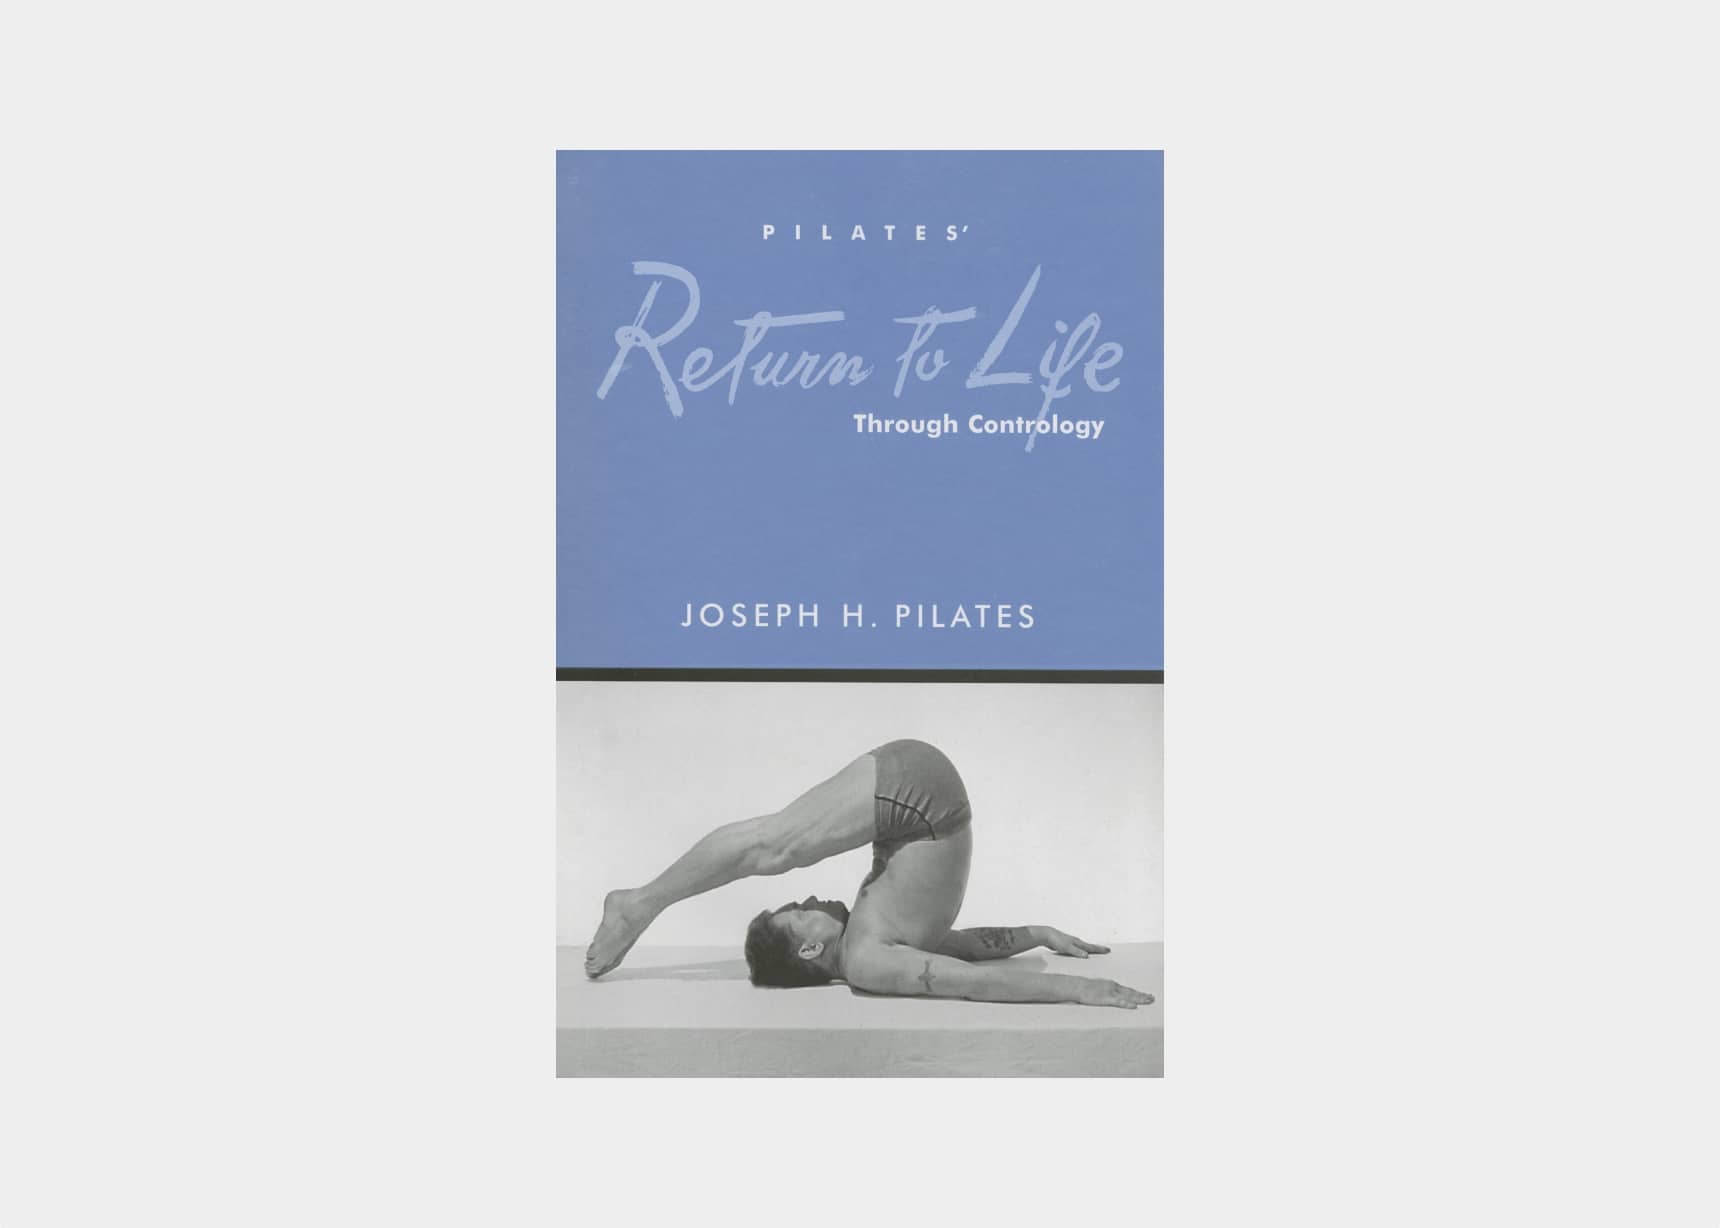 Return to Life book, conceptual basis and philosophy of the Pilates method 